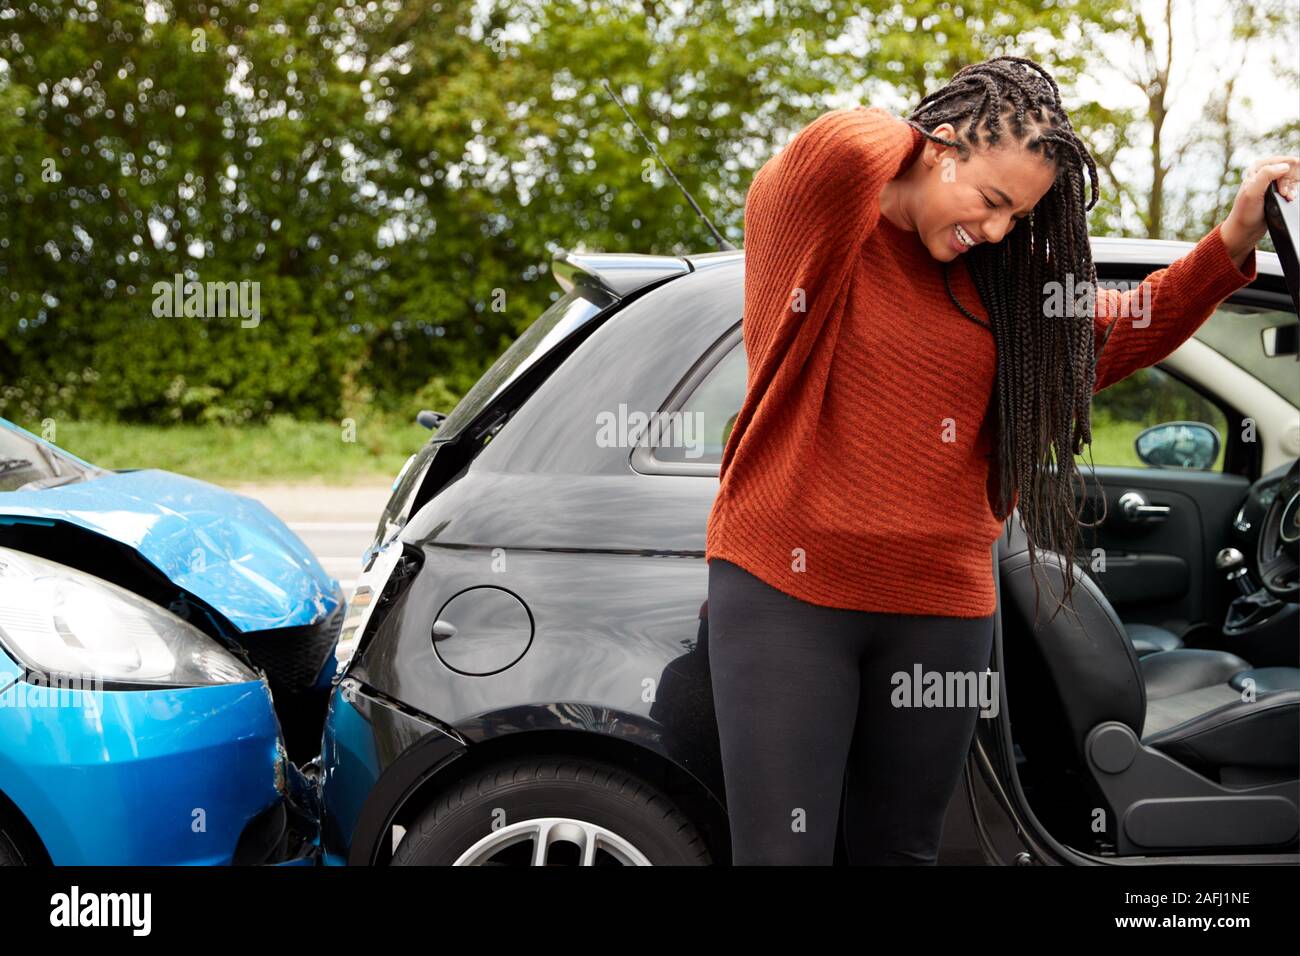 Female Motorist With Whiplash Injury In Car Crash Getting Out Of Vehicle Stock Photo